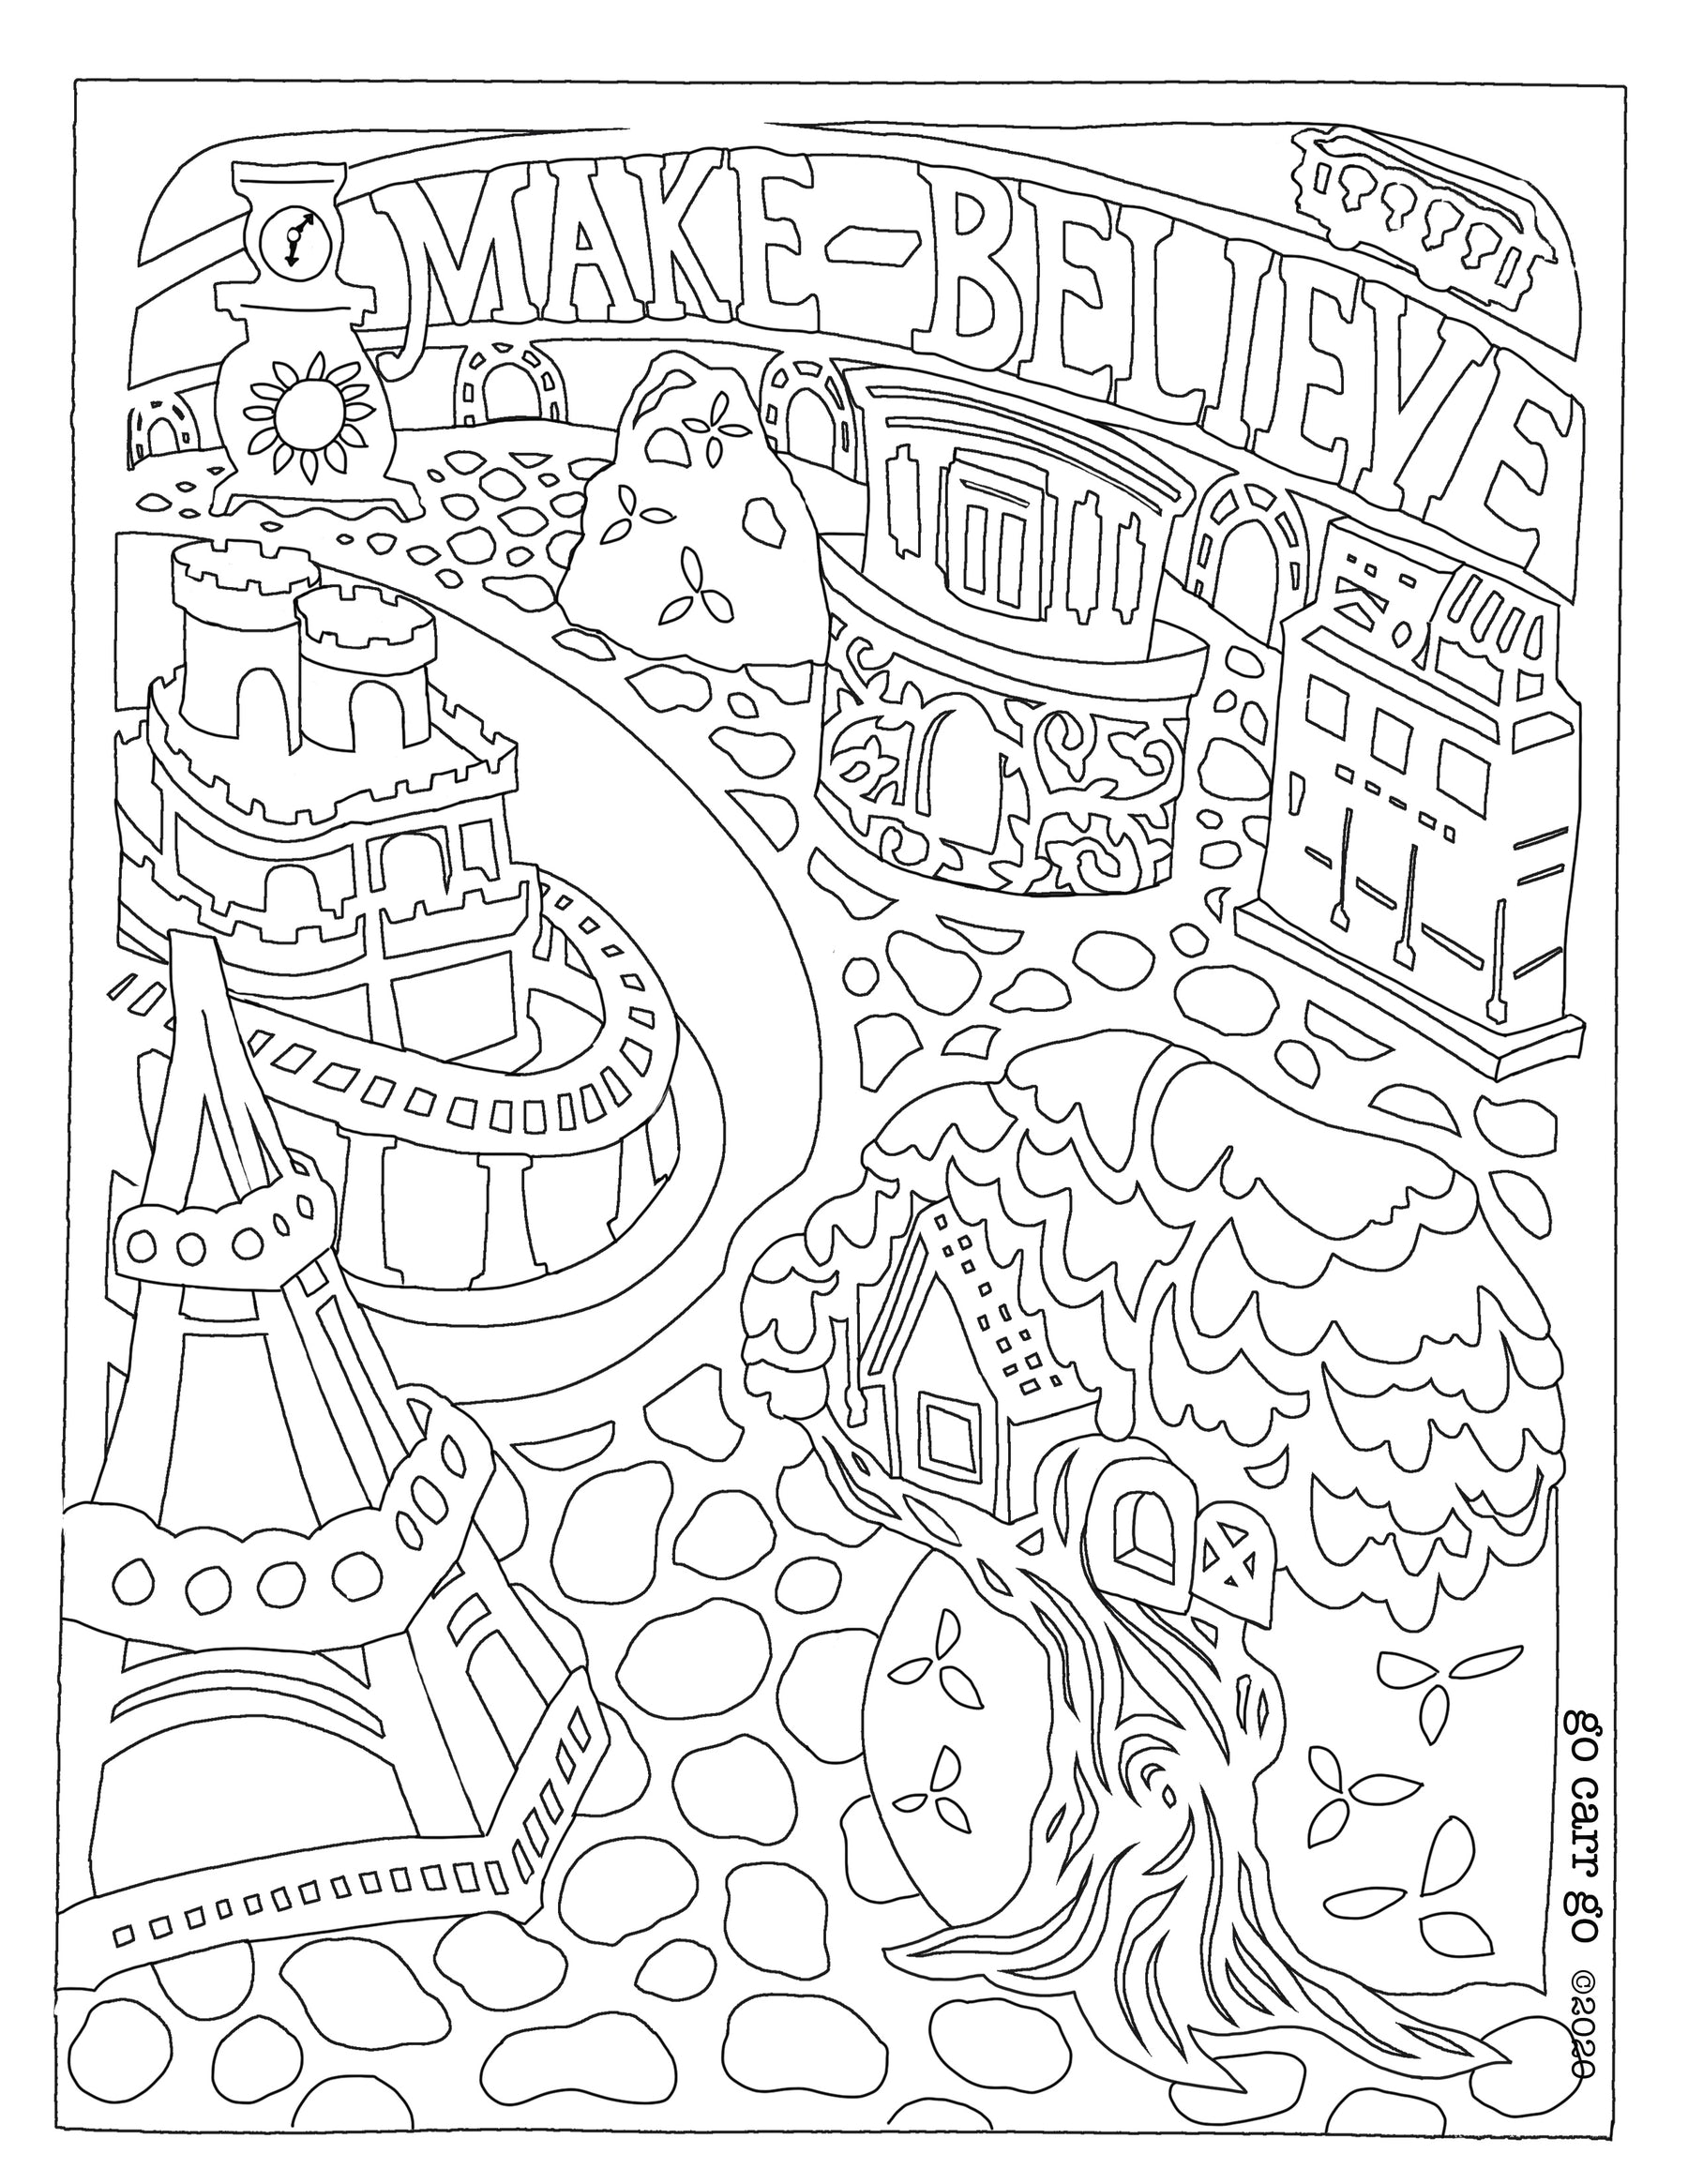 Make Believe Coloring Page Go Carr Go